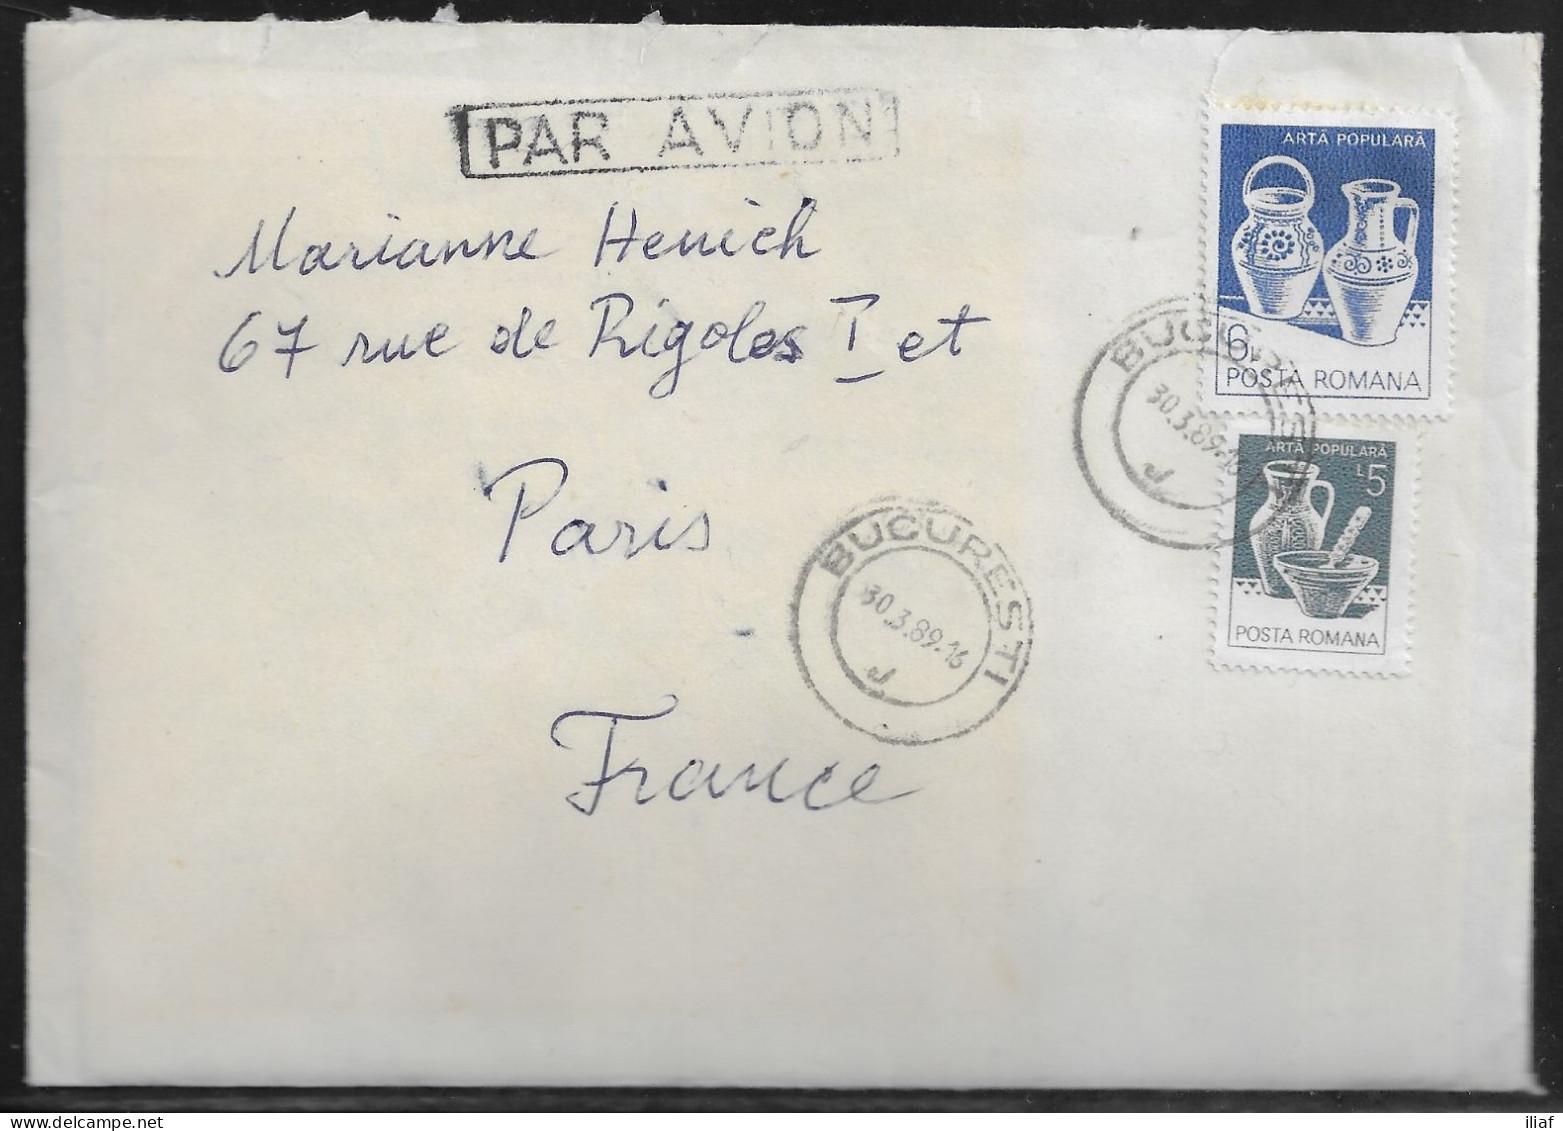 Romania. Stamps Sc. 3109-3110 On Air Mail Letter, Sent From Bucharest On 30.03.1989 To France. Letter Inside - Storia Postale